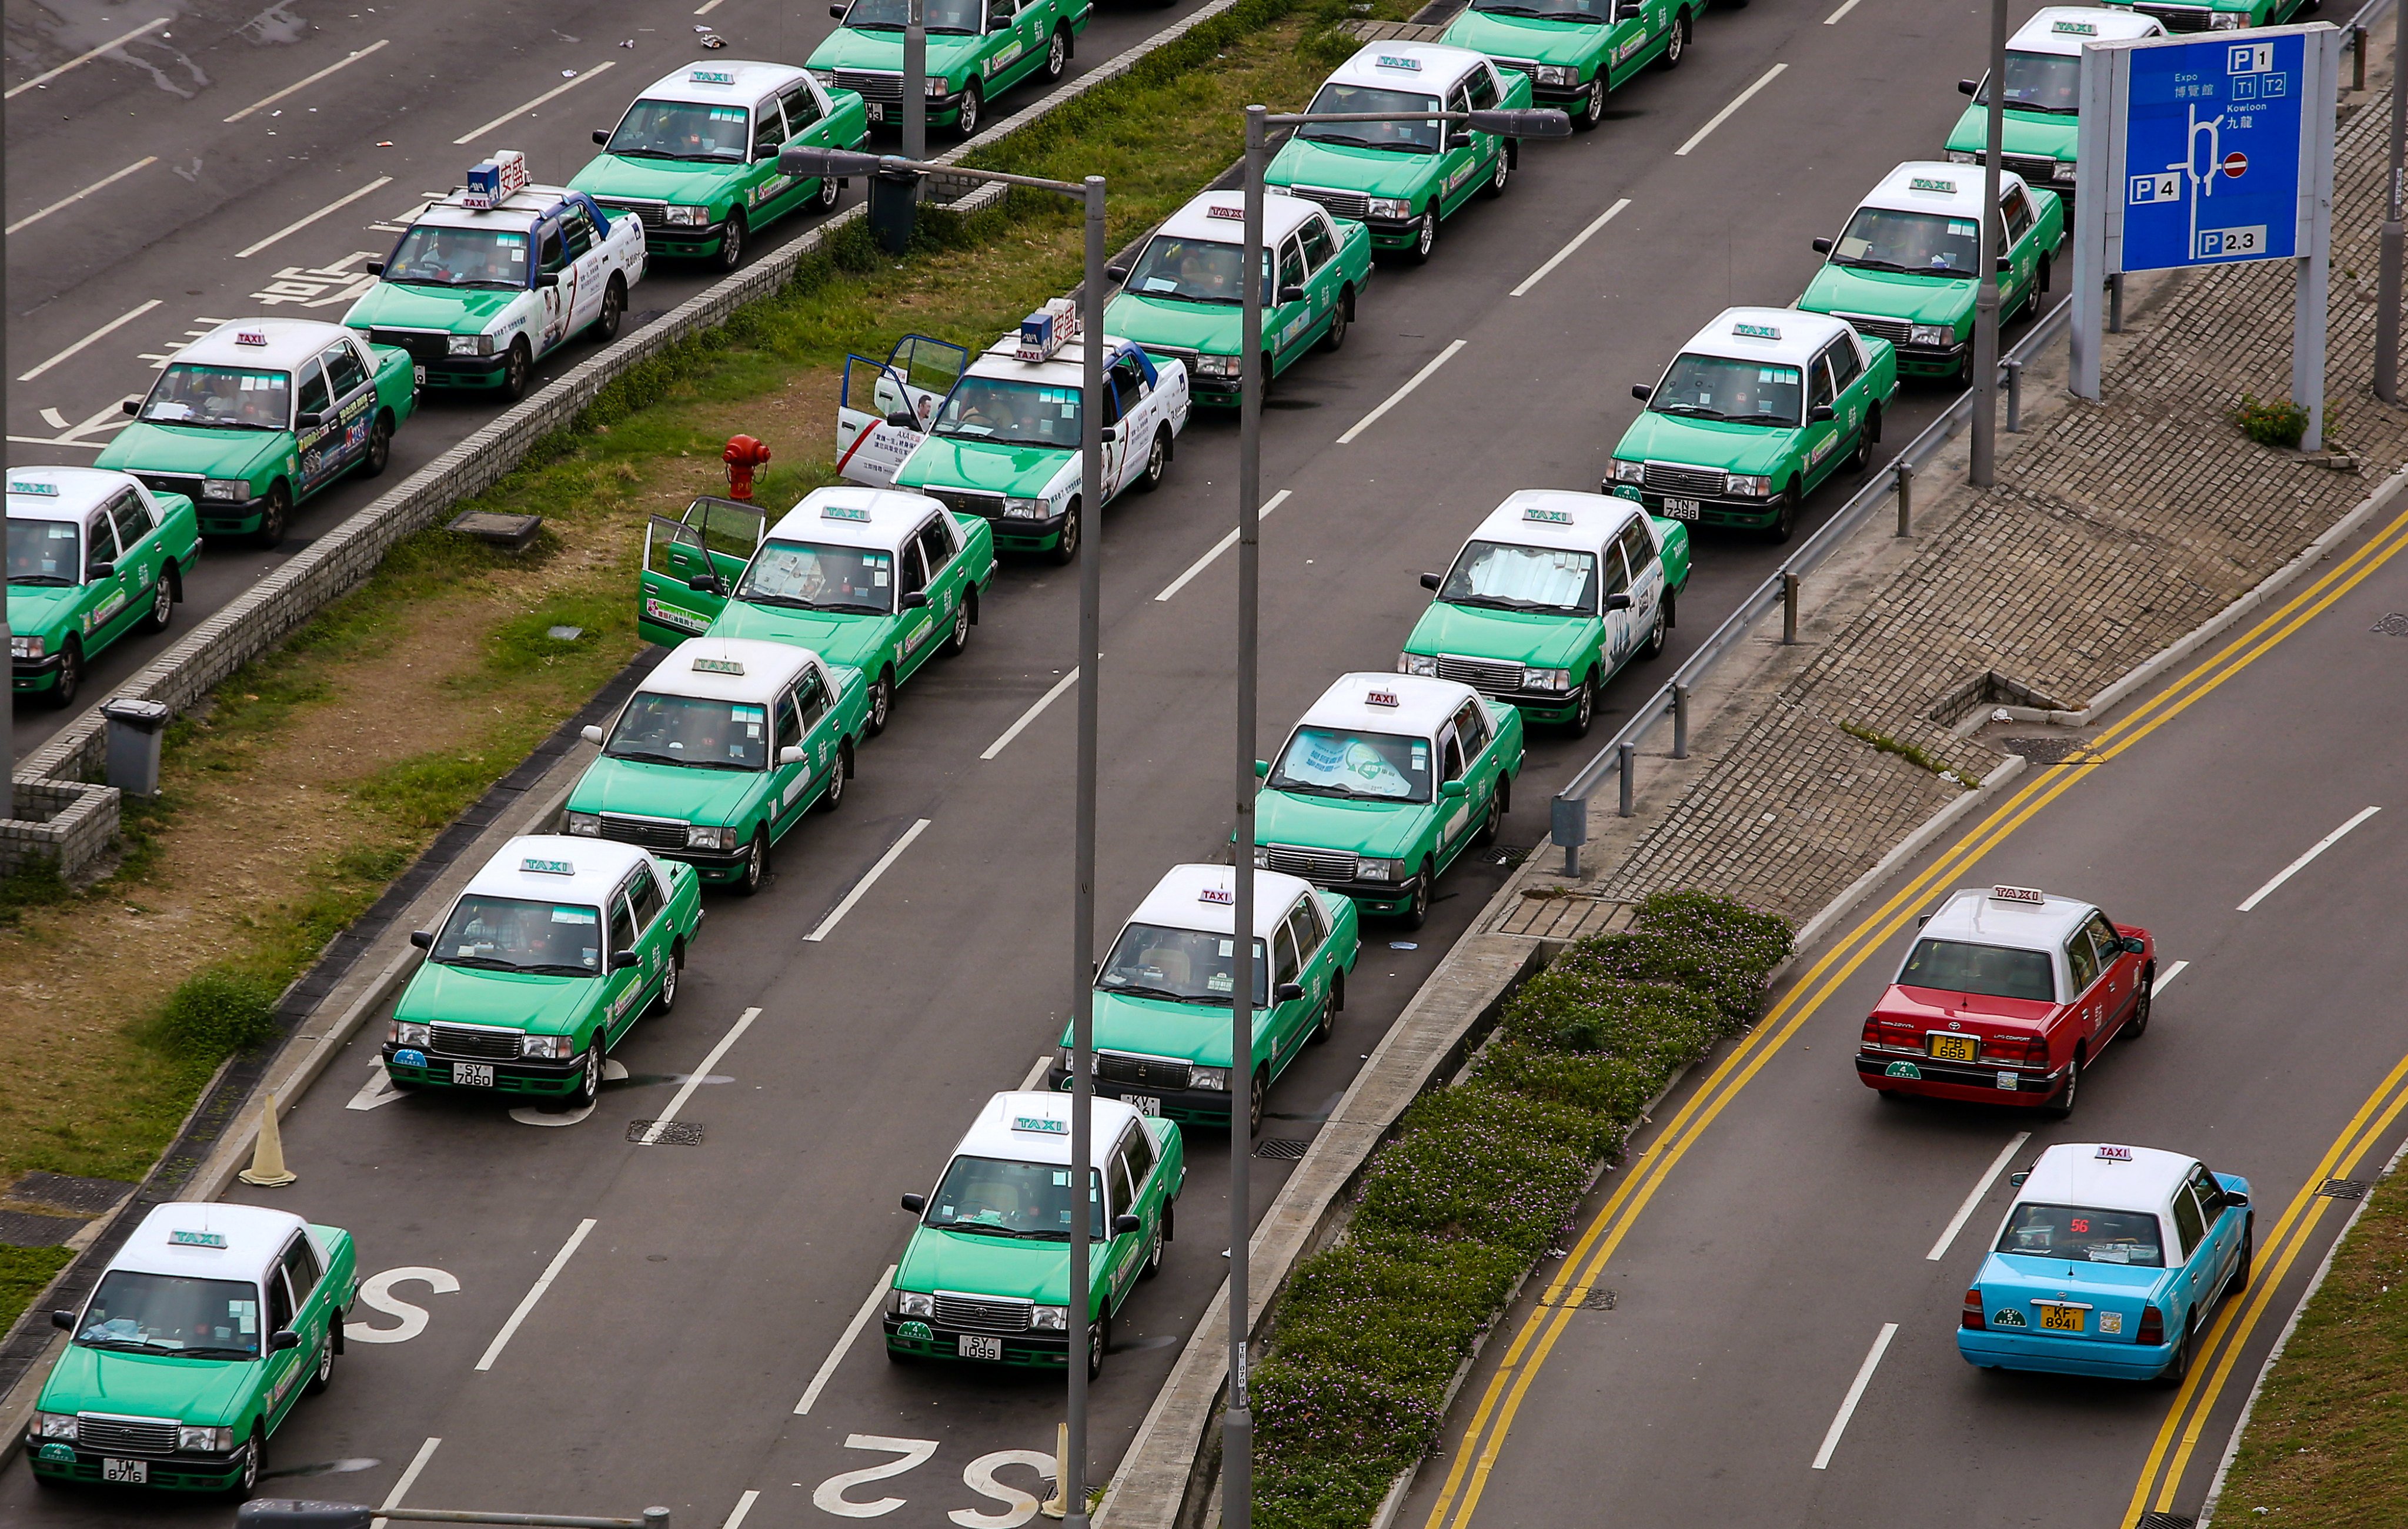 The starting rate for green New Territories cabs will rise to HK$25.50. Photo: Sam Tsang